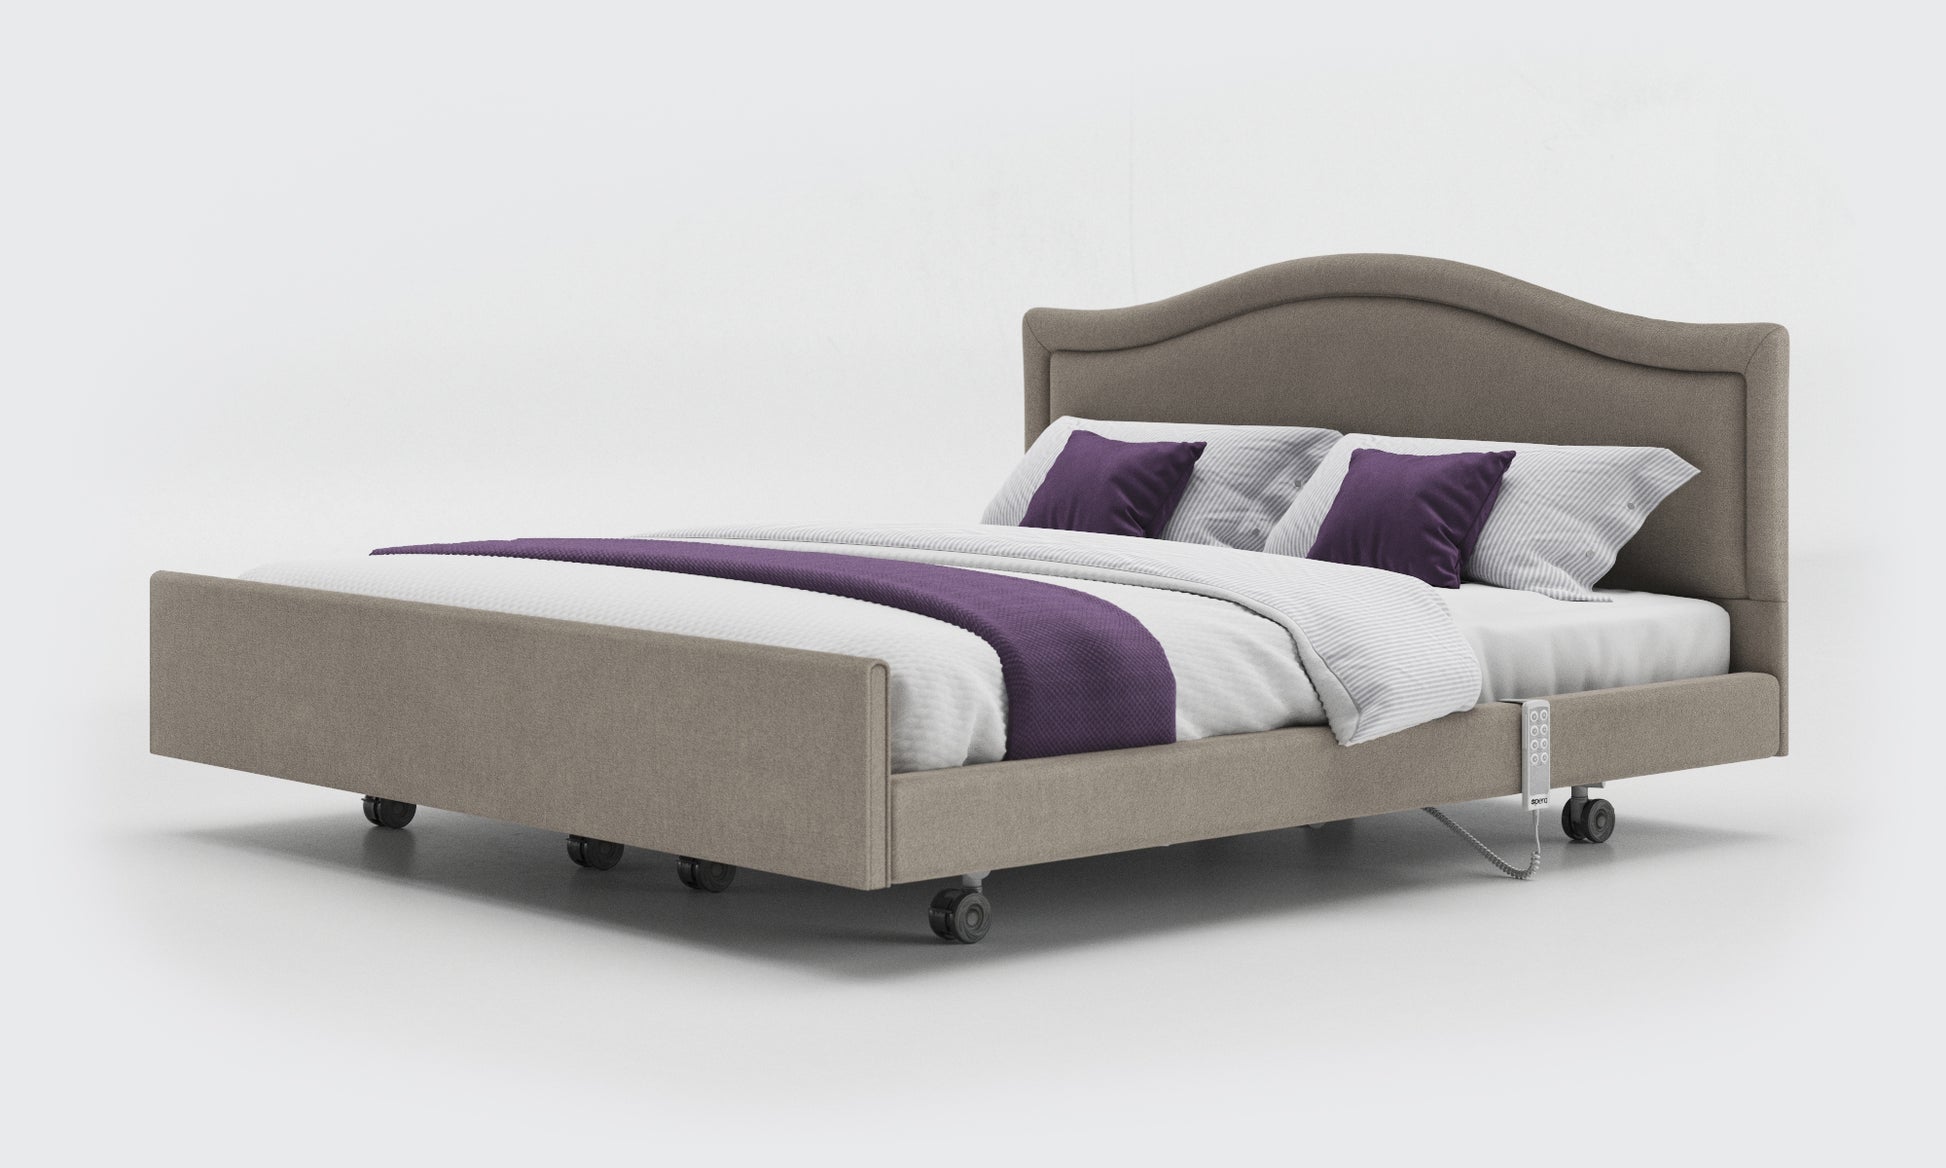 Zinc Fabric Signature Comfort Dual Profiling Bed With a Pearl Headboard